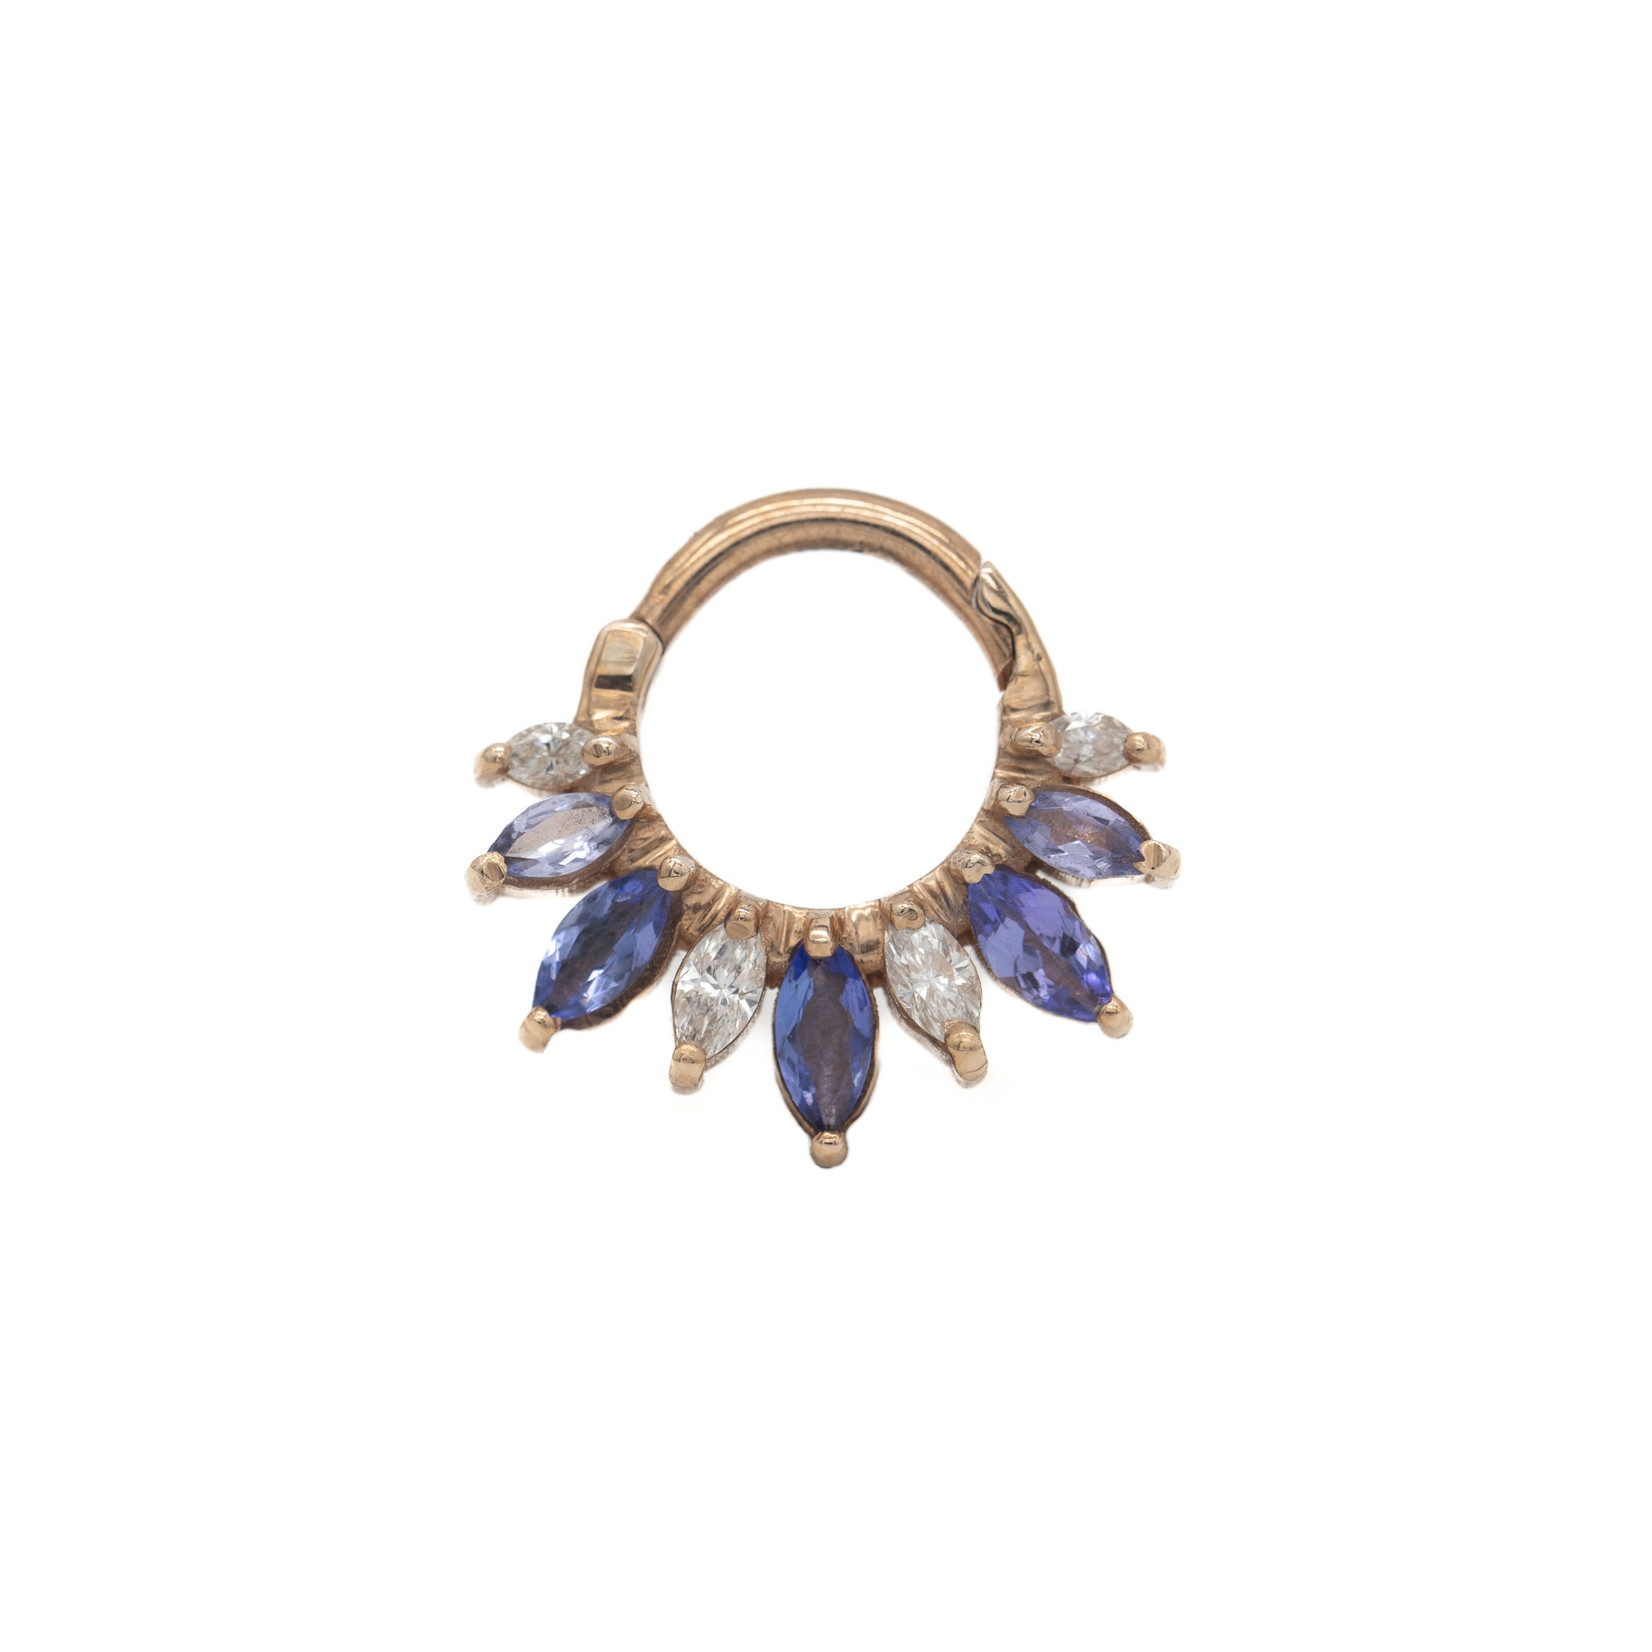 Other Couture 16g 5/16" RG Tilt Shift with Tanzanite and Diamond